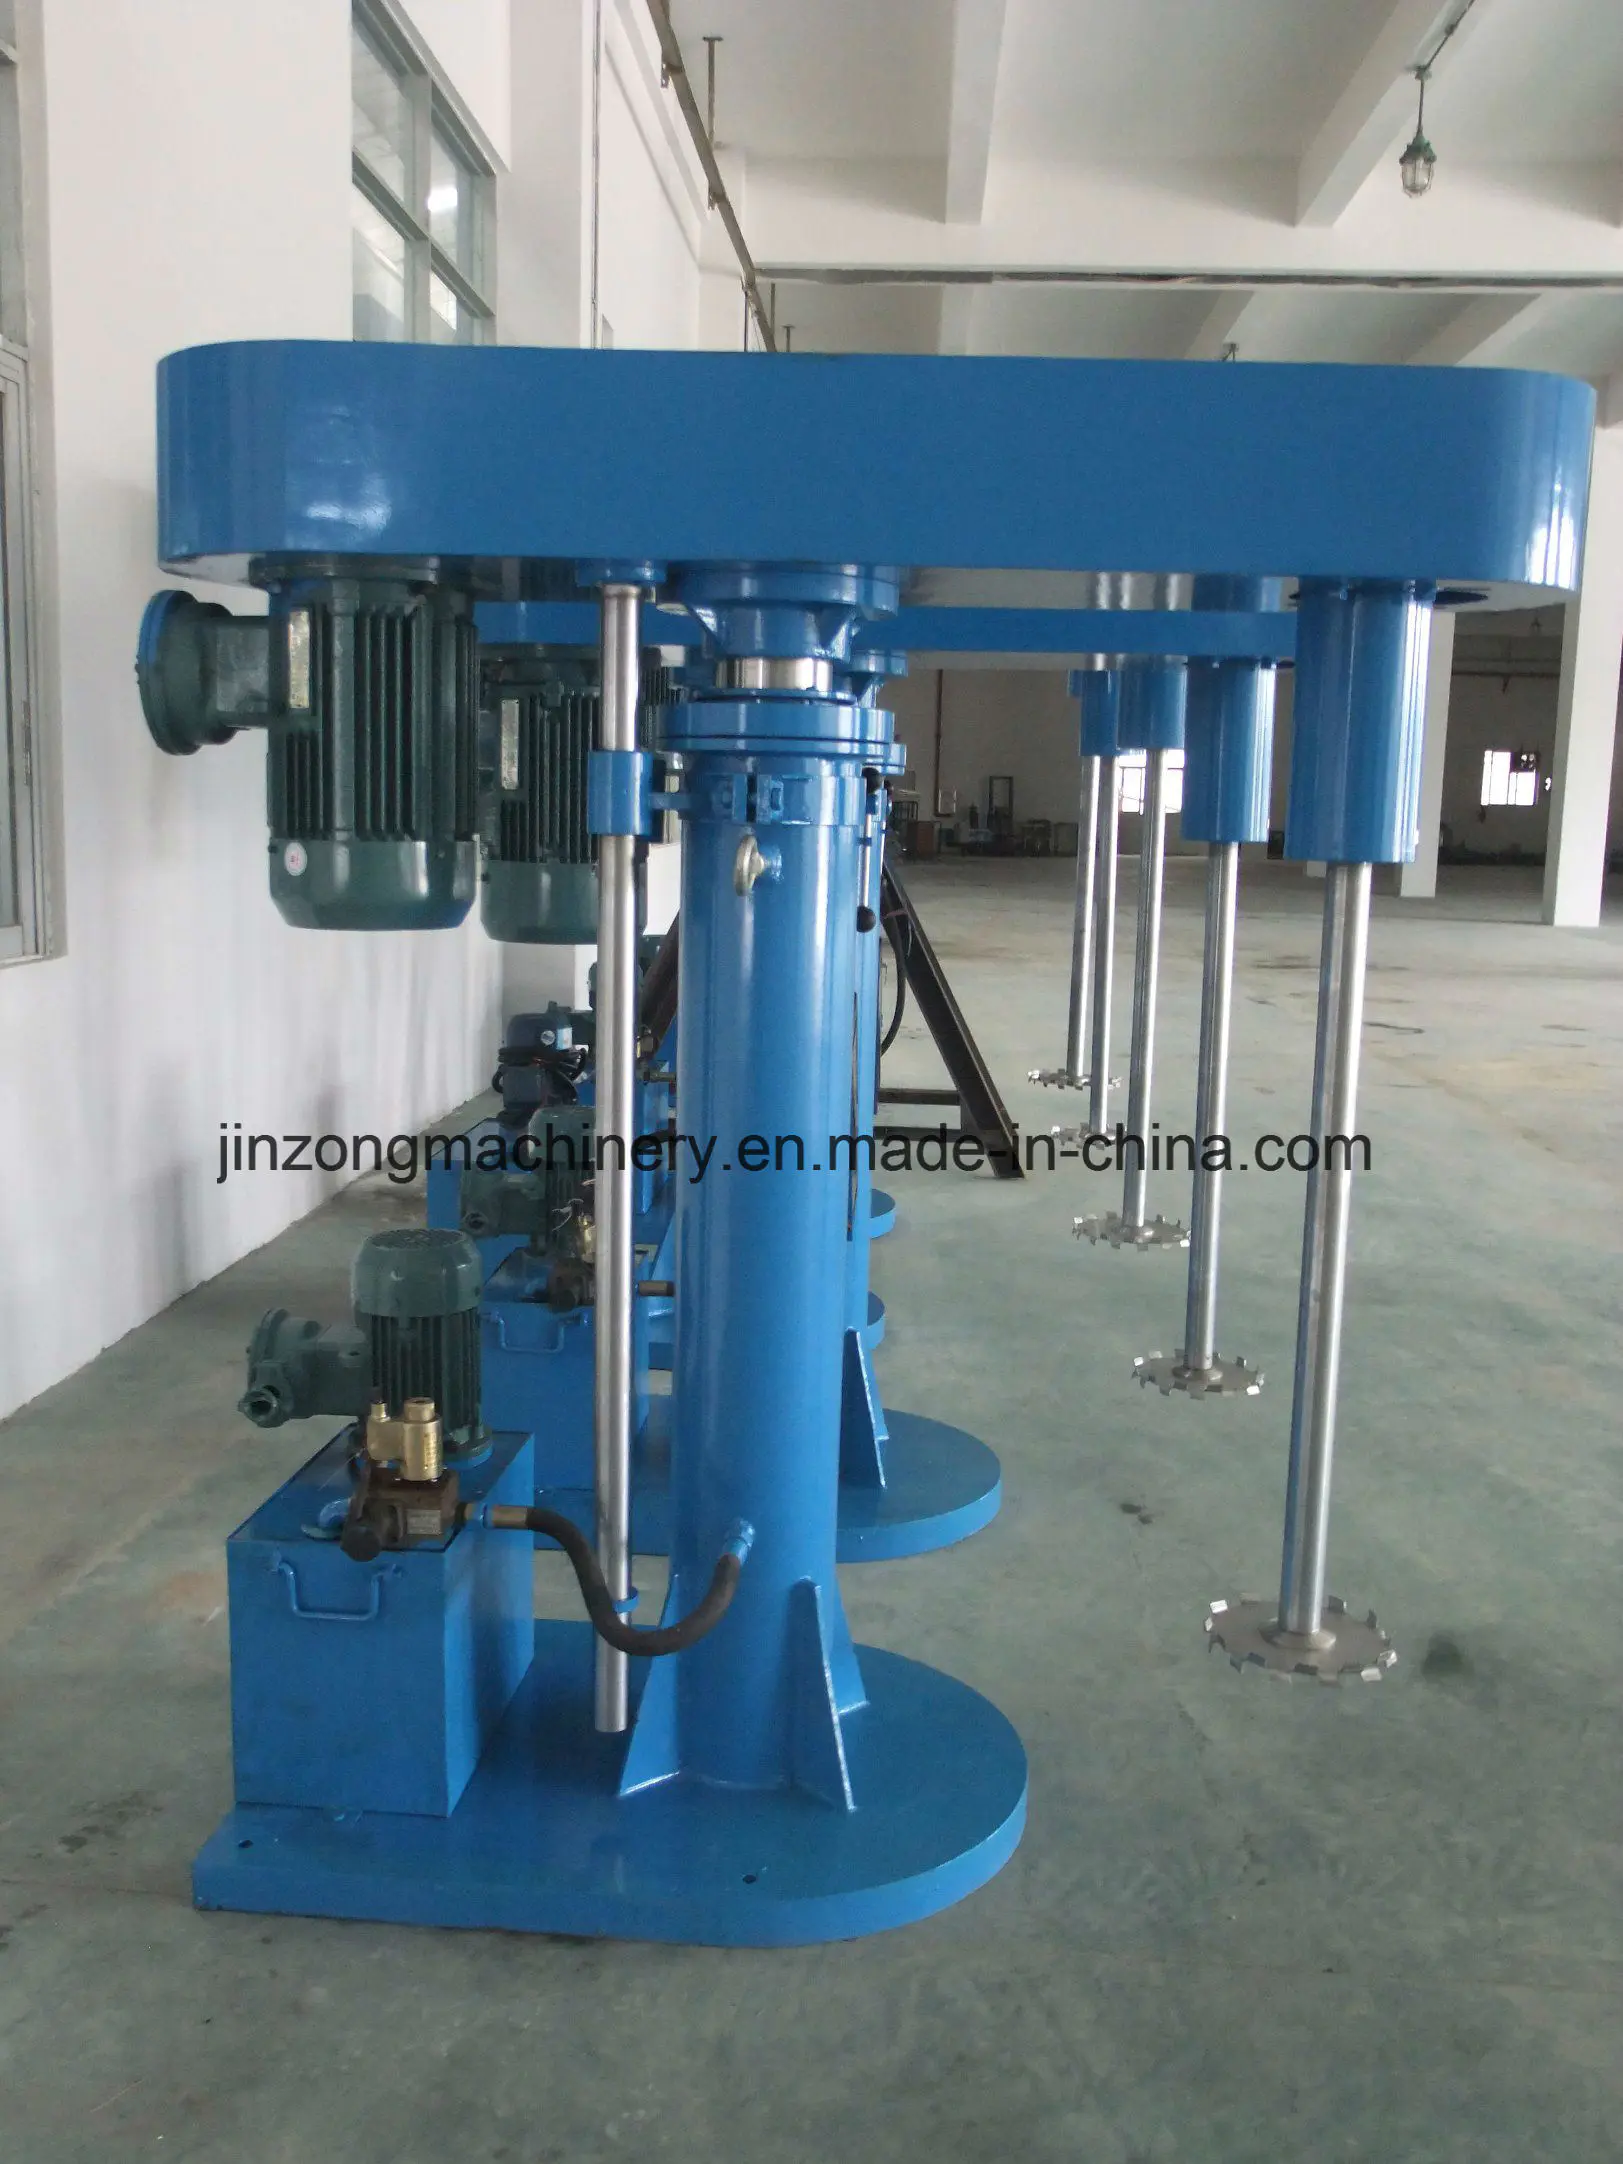 The Best Service Electric Paint Thinner Mixer Machine